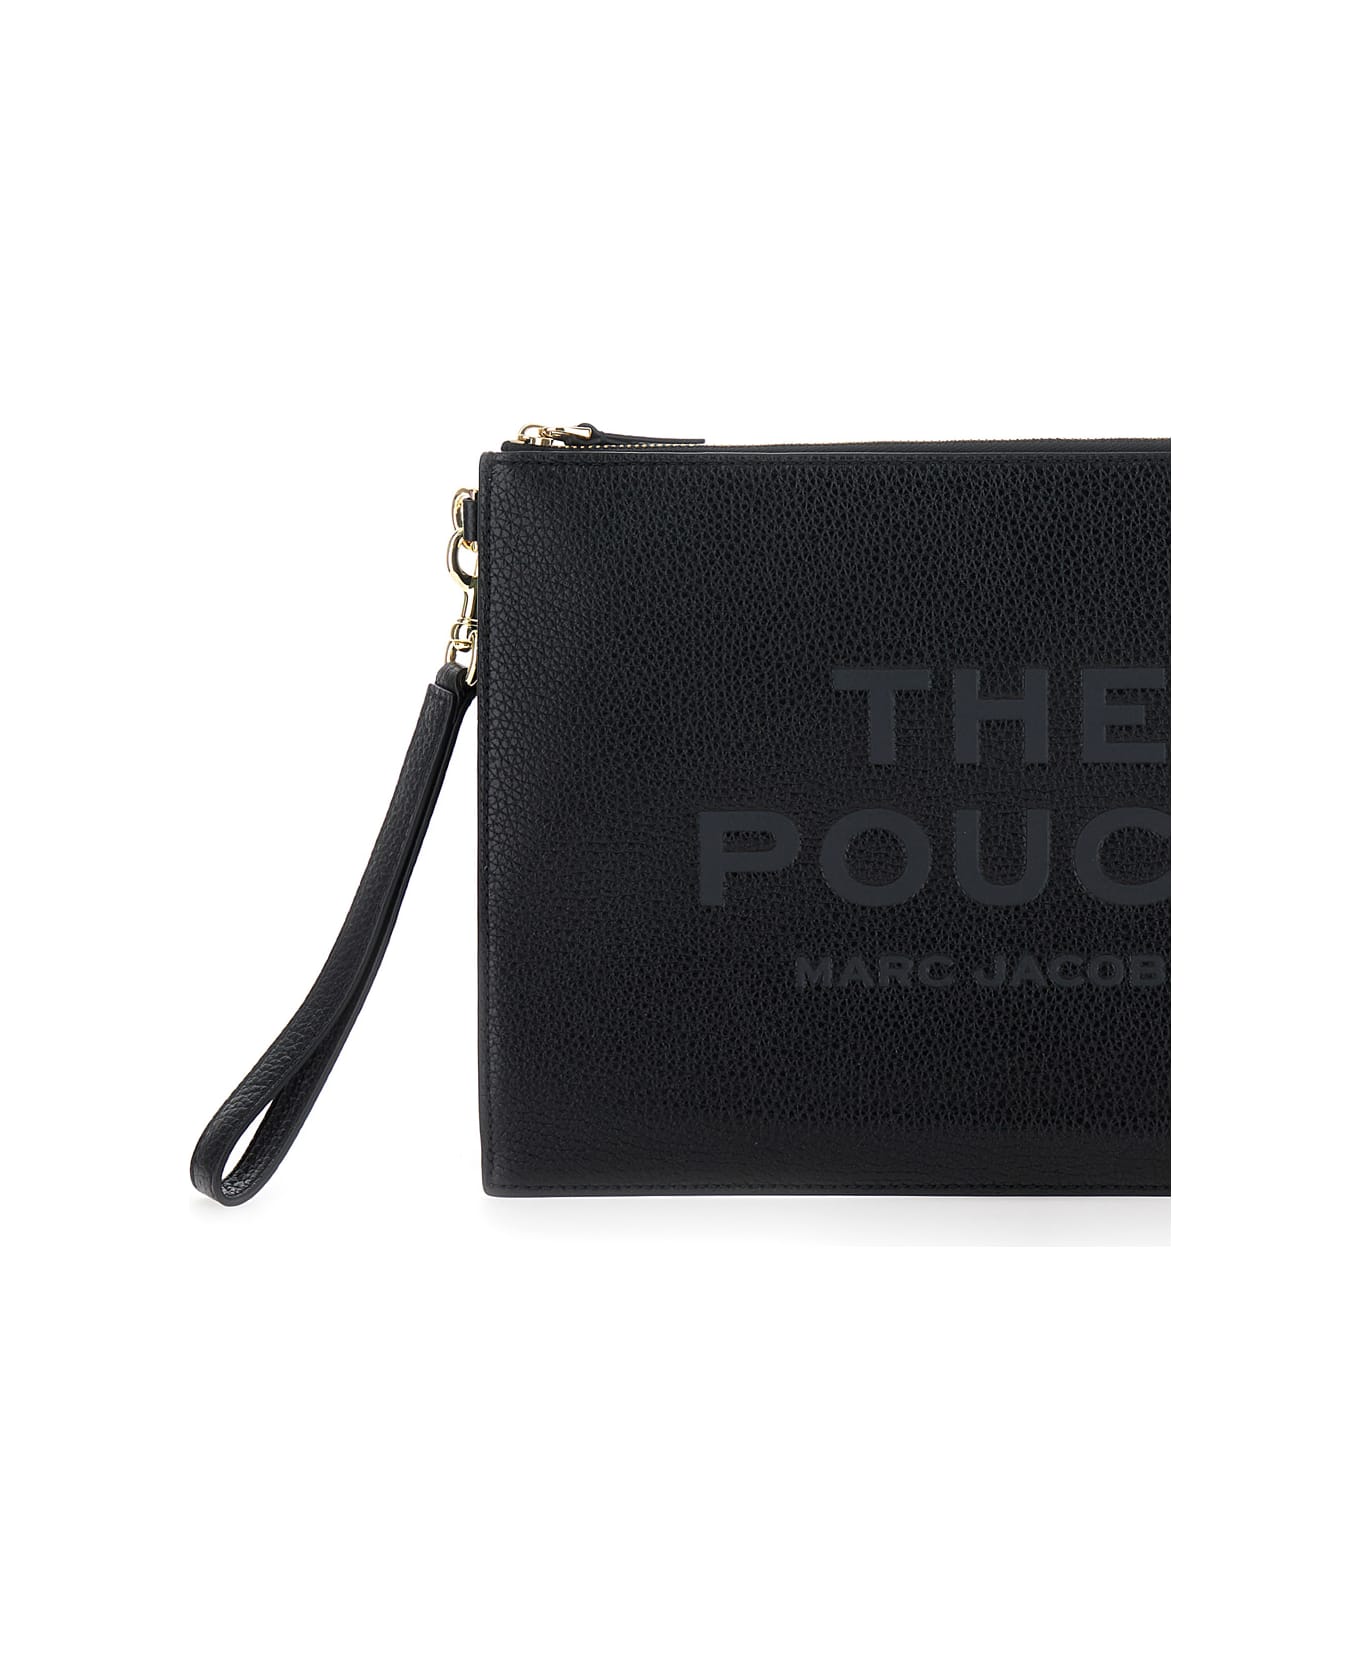 Marc Jacobs The Large Pouch - Black クラッチバッグ